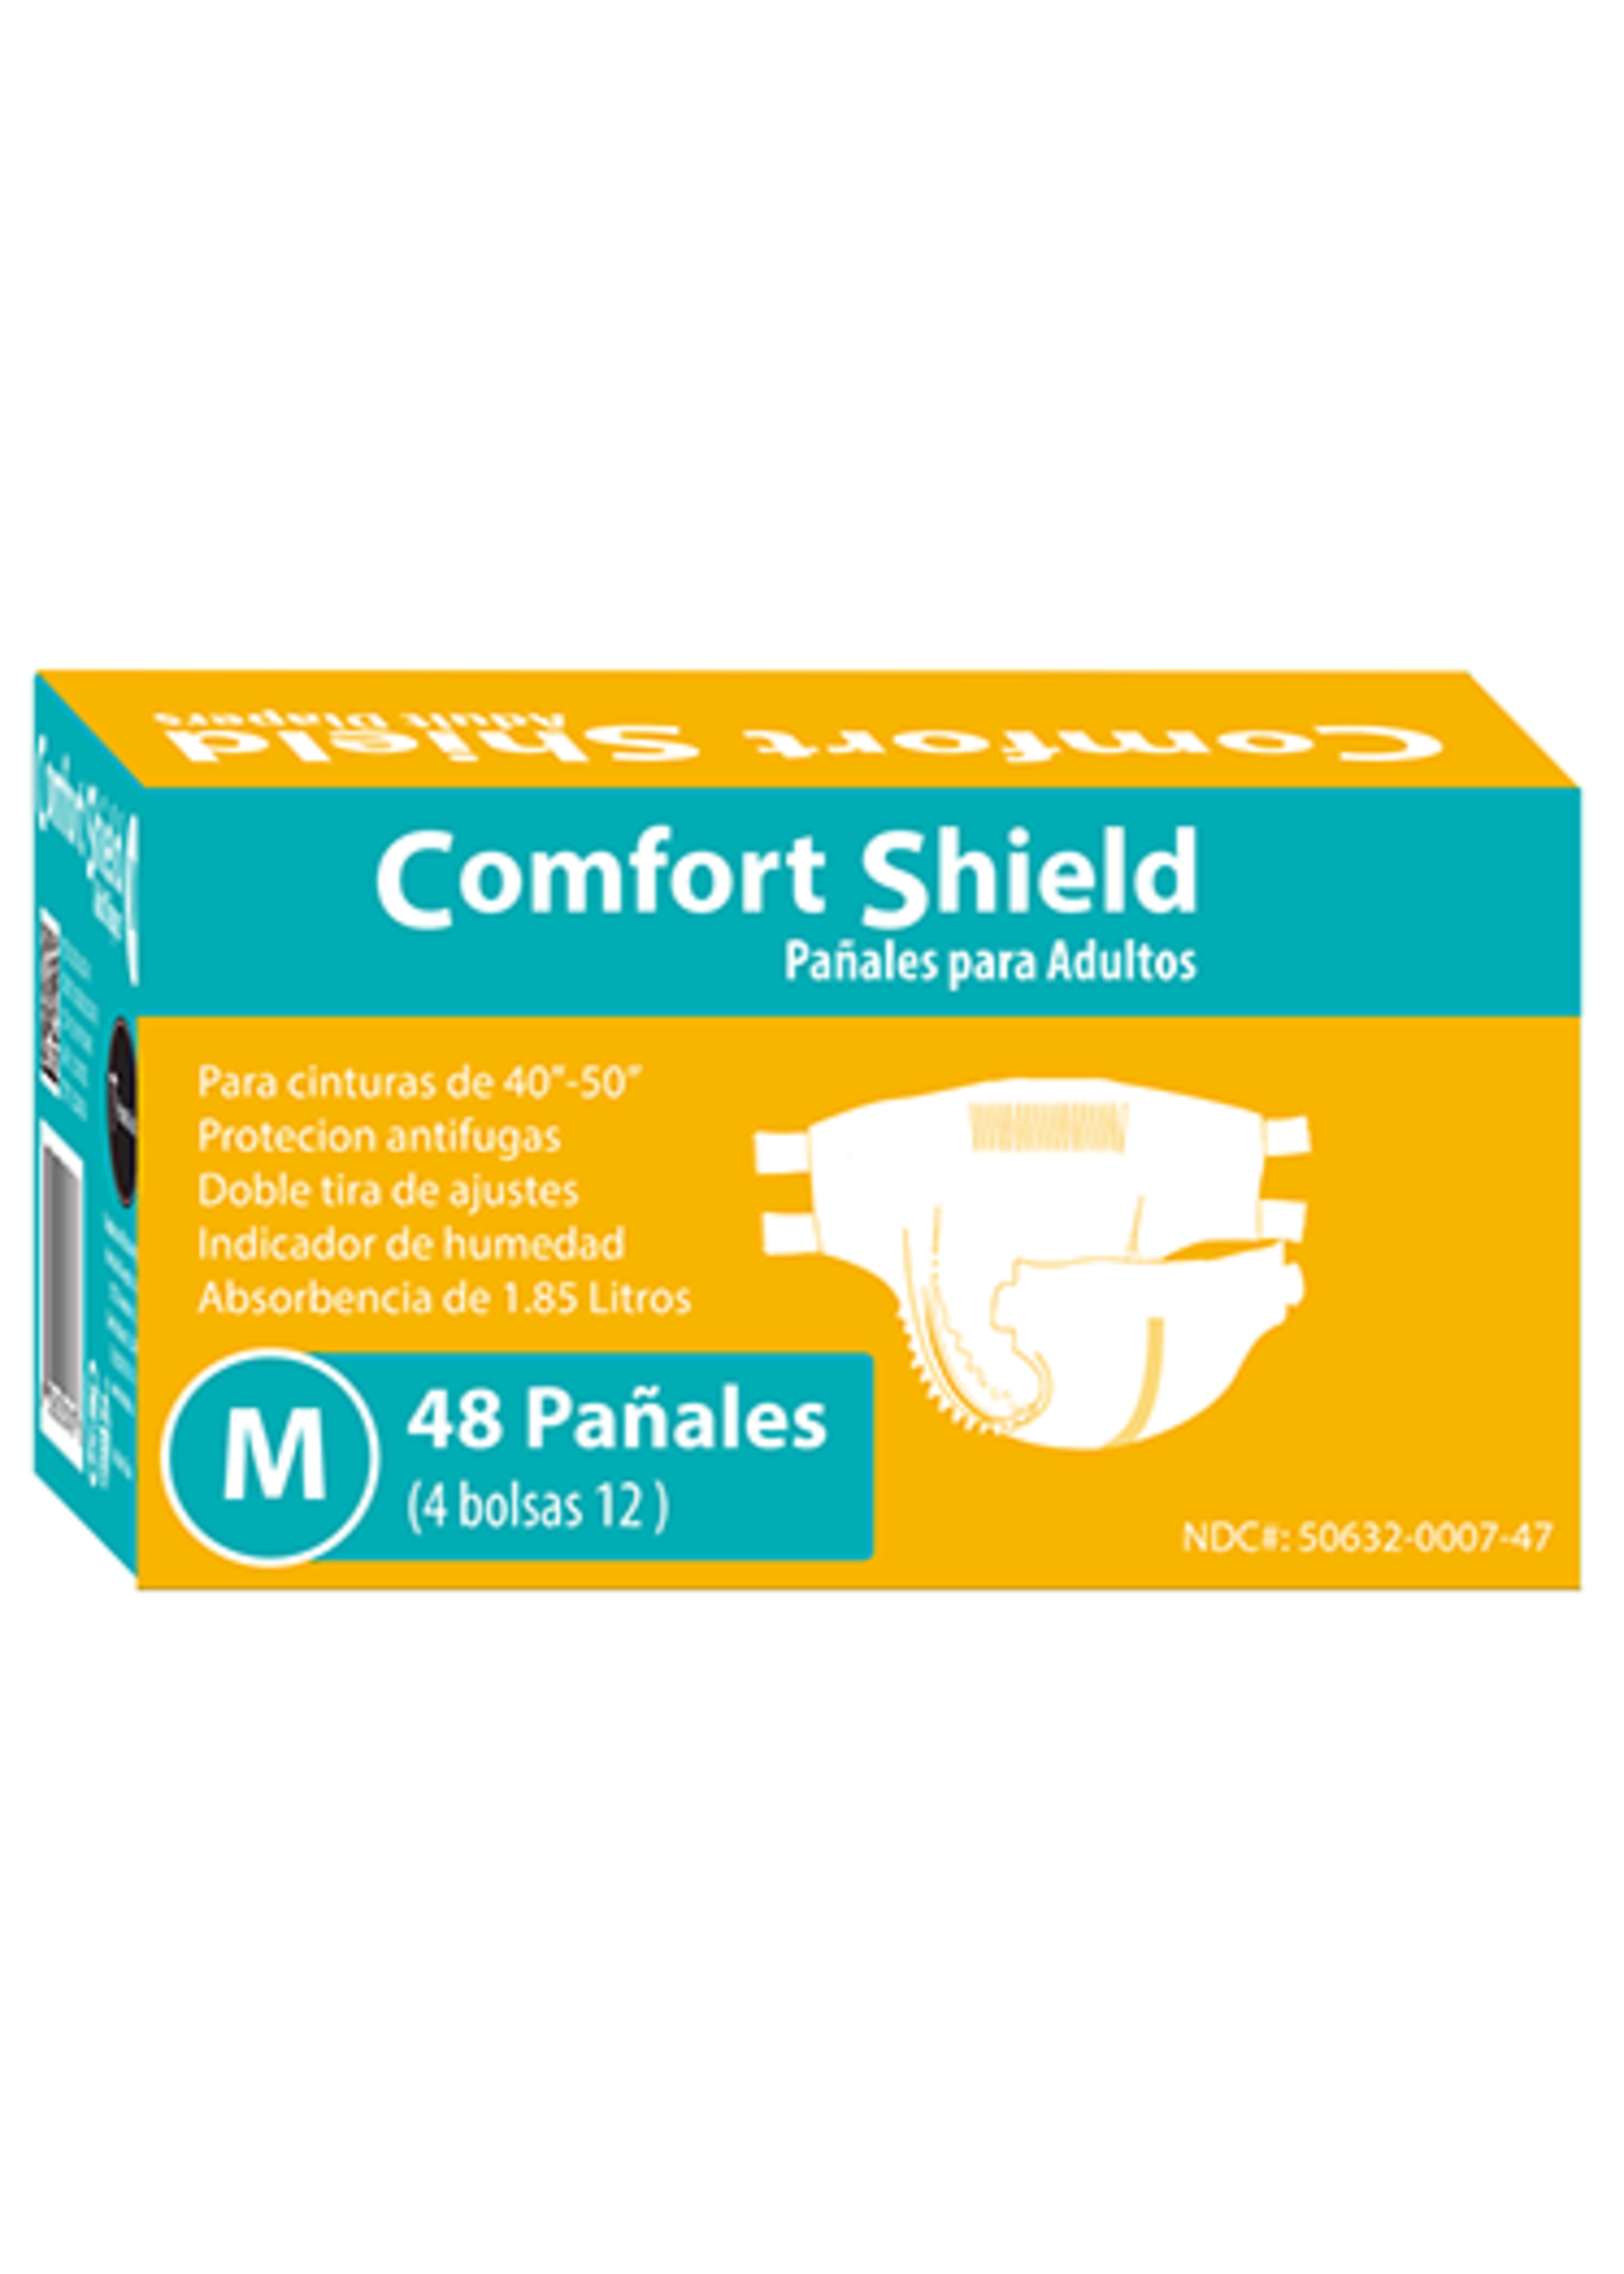 Home Aide Comfort Shield Adult Diapers (Medium) - NDC# 50632-0007-47